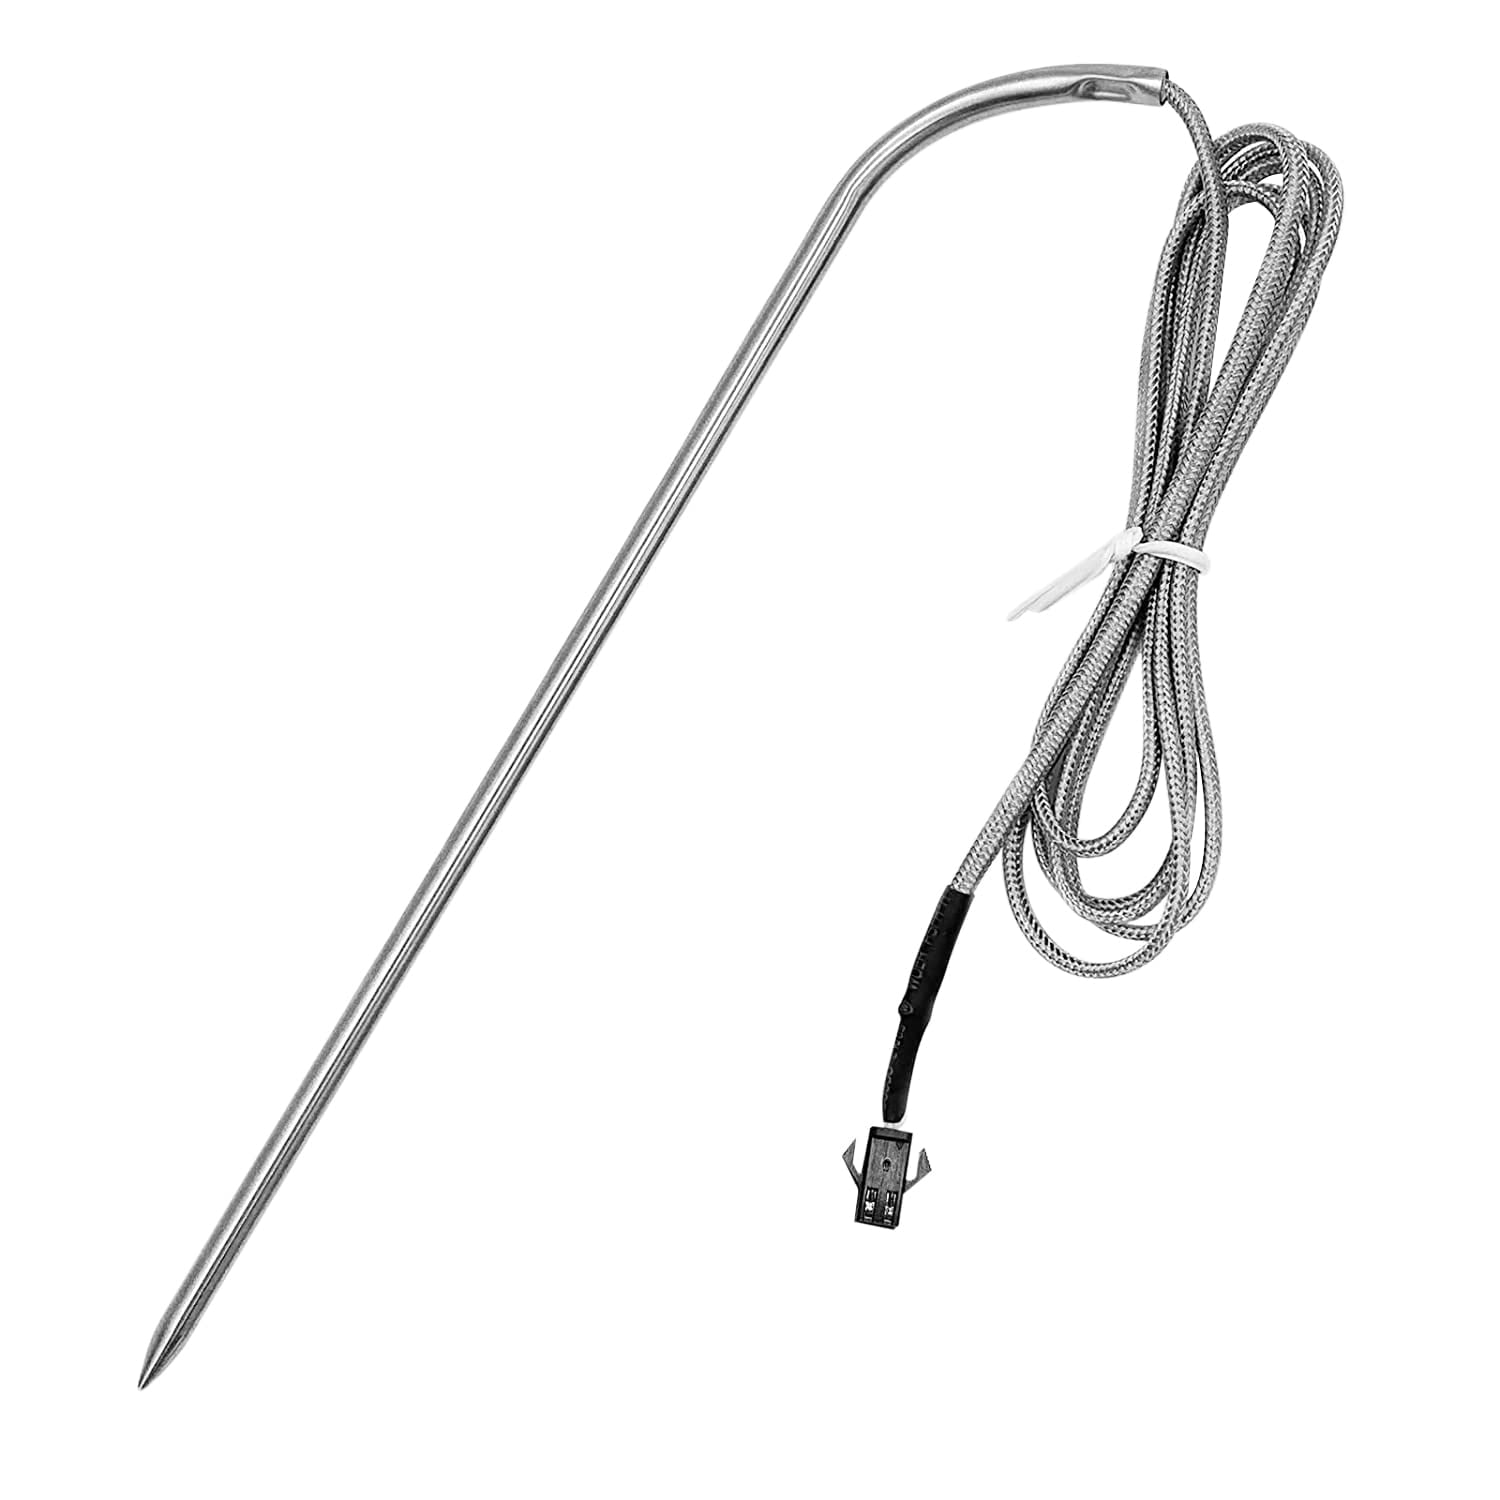 Replacement Temperature Probe Sensor Fits for Camp Chef Grills Heat Woven Wires 